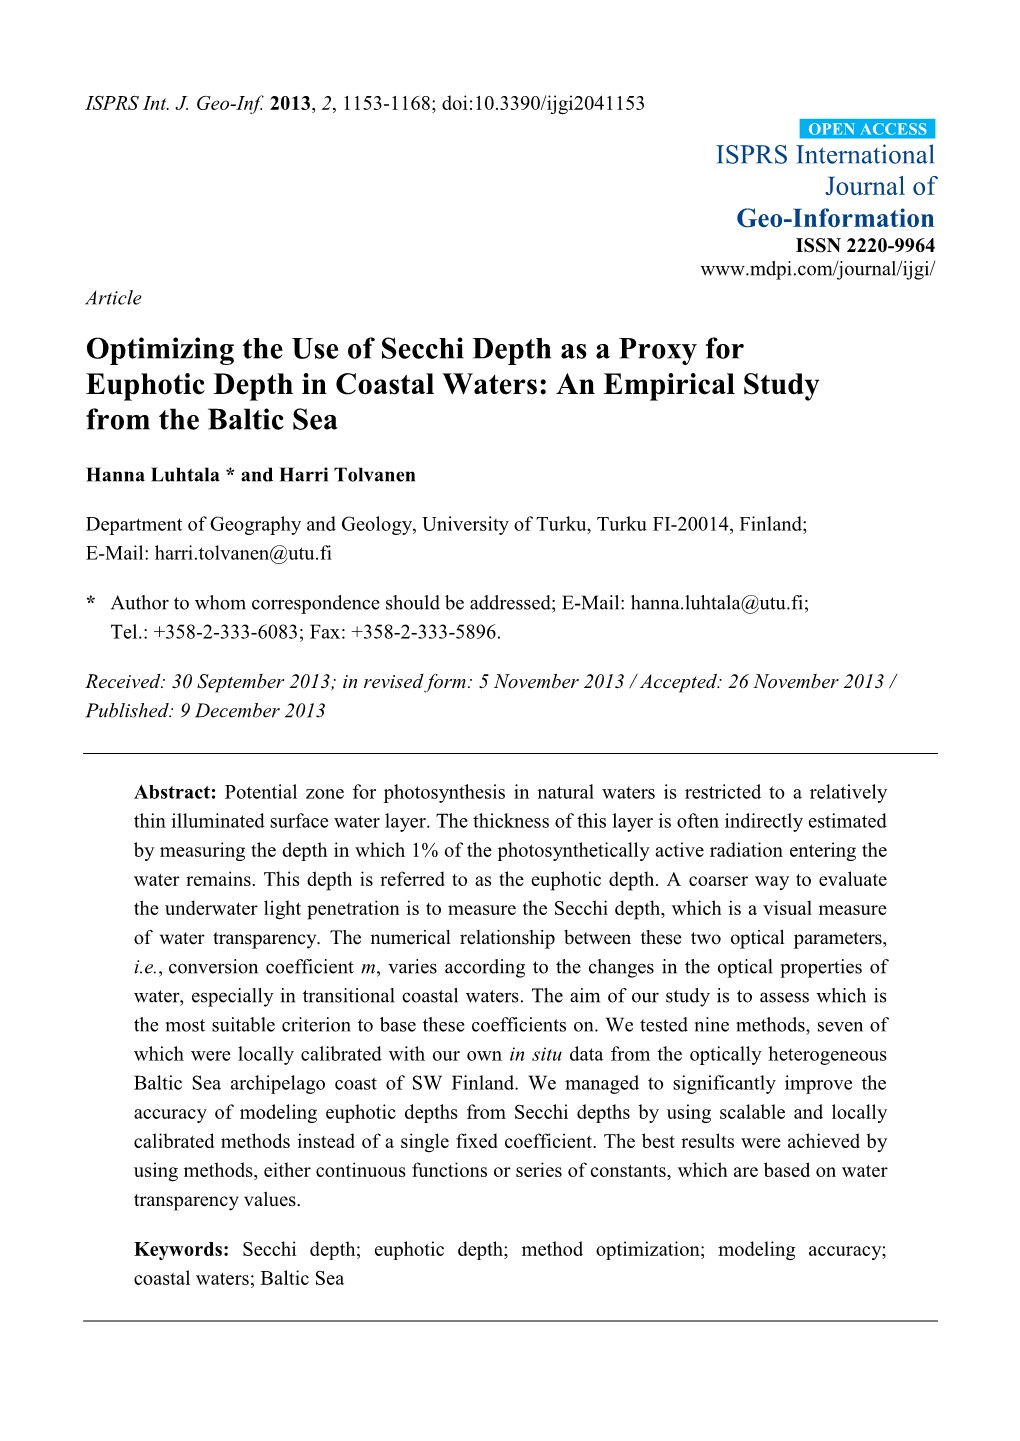 Optimizing the Use of Secchi Depth As a Proxy for Euphotic Depth in Coastal Waters: an Empirical Study from the Baltic Sea